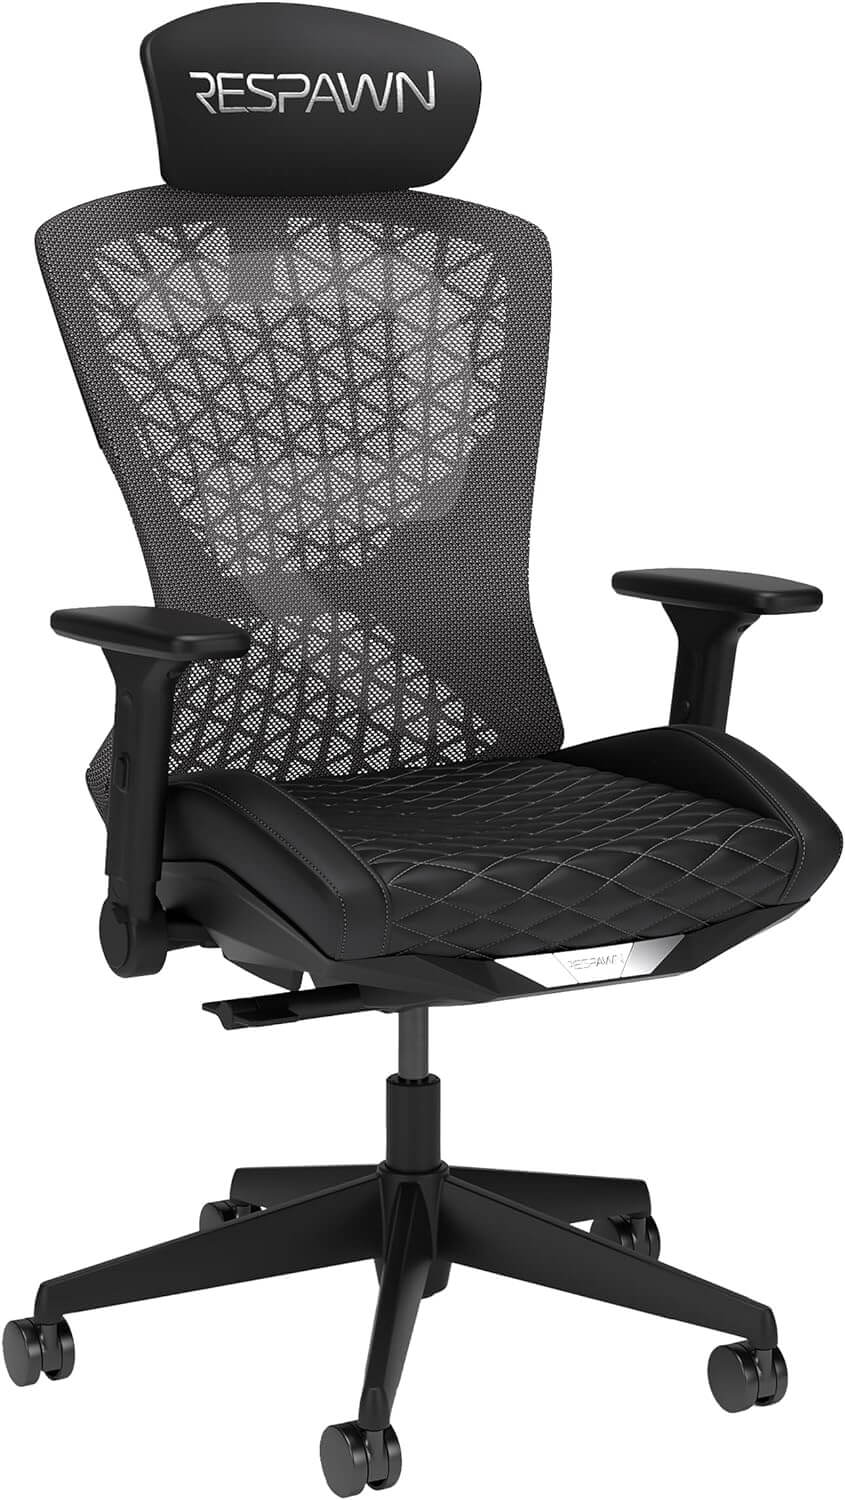 RESPAWN Spire Gaming Chair